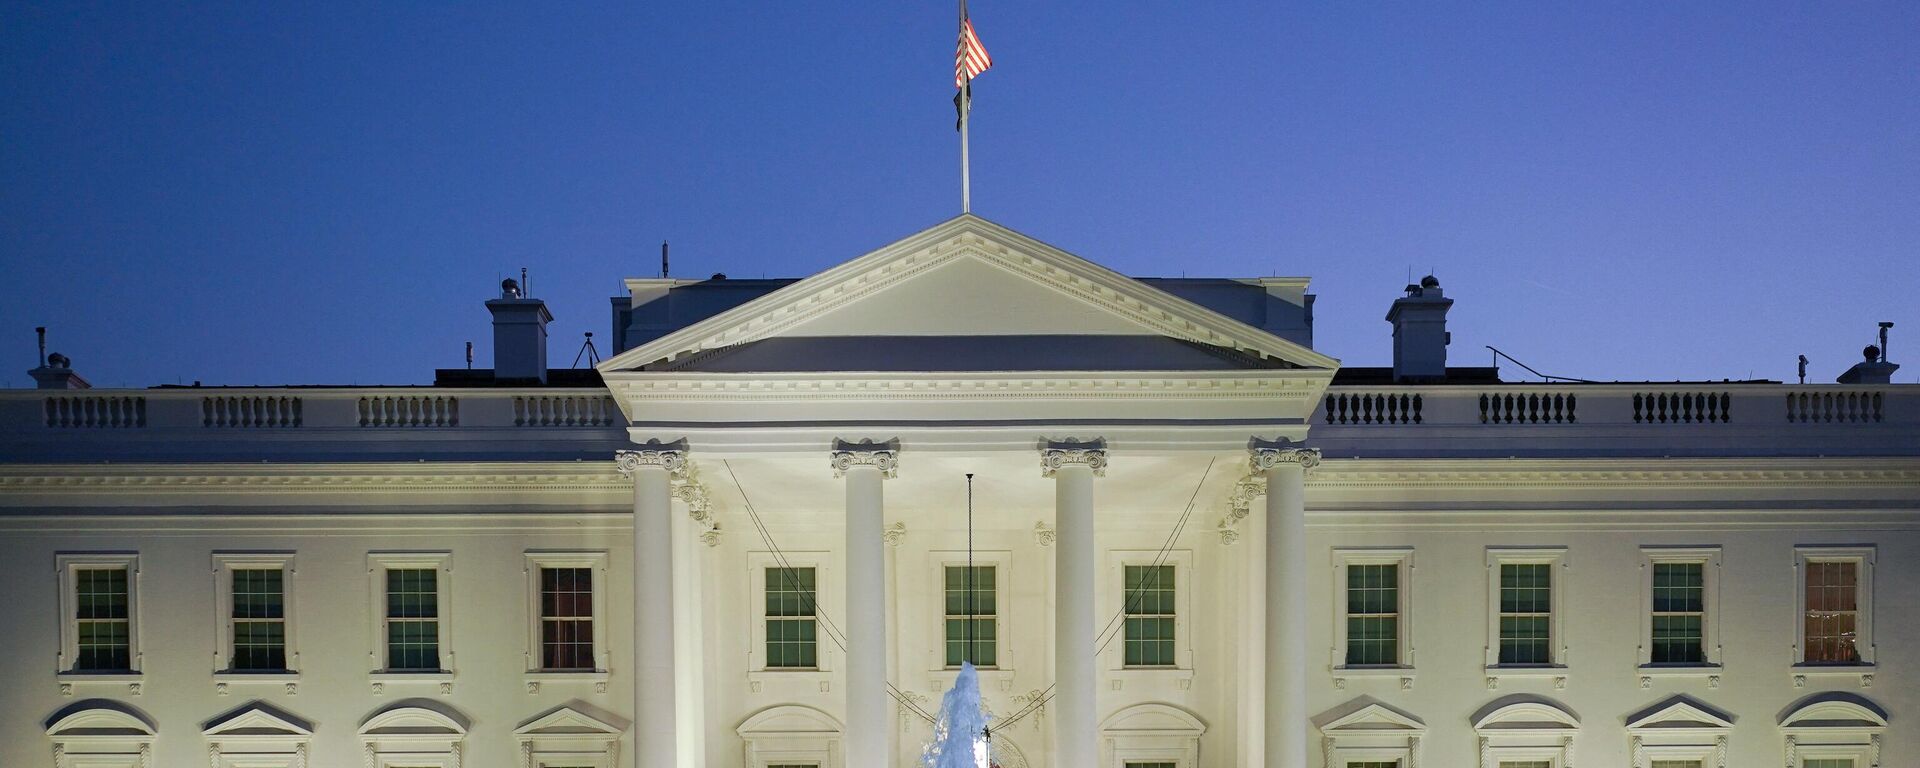 The White House is seen at dusk during the US midterm election, in Washington, DC, on November 8, 2022 - Sputnik International, 1920, 15.11.2022